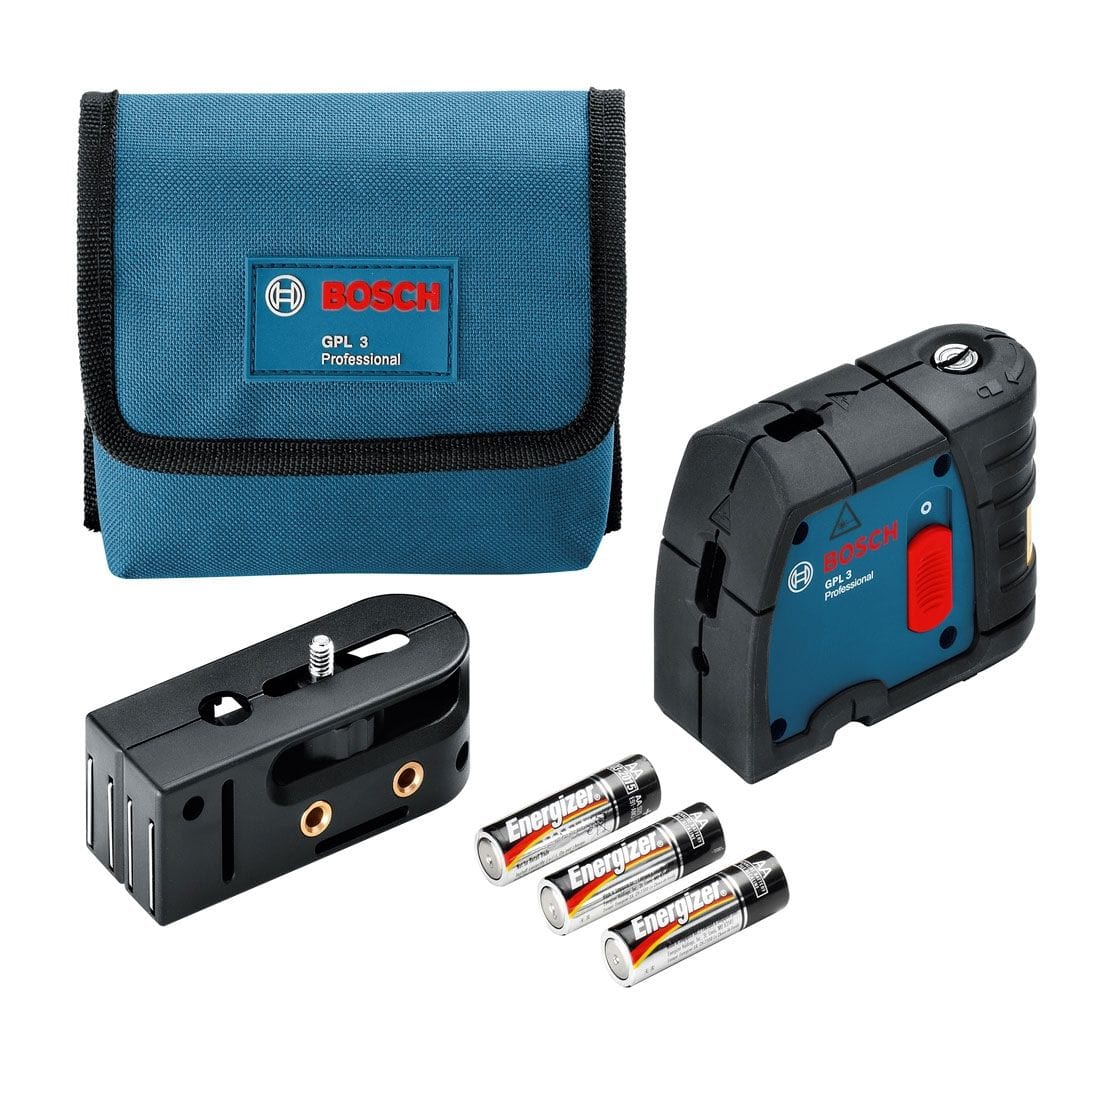 Attain precise point leveling with the Bosch Professional 30m Point Laser Level (GPL 3) at SupplyMaster.store in Ghana. Digital Meter Buy Tools hardware Building materials